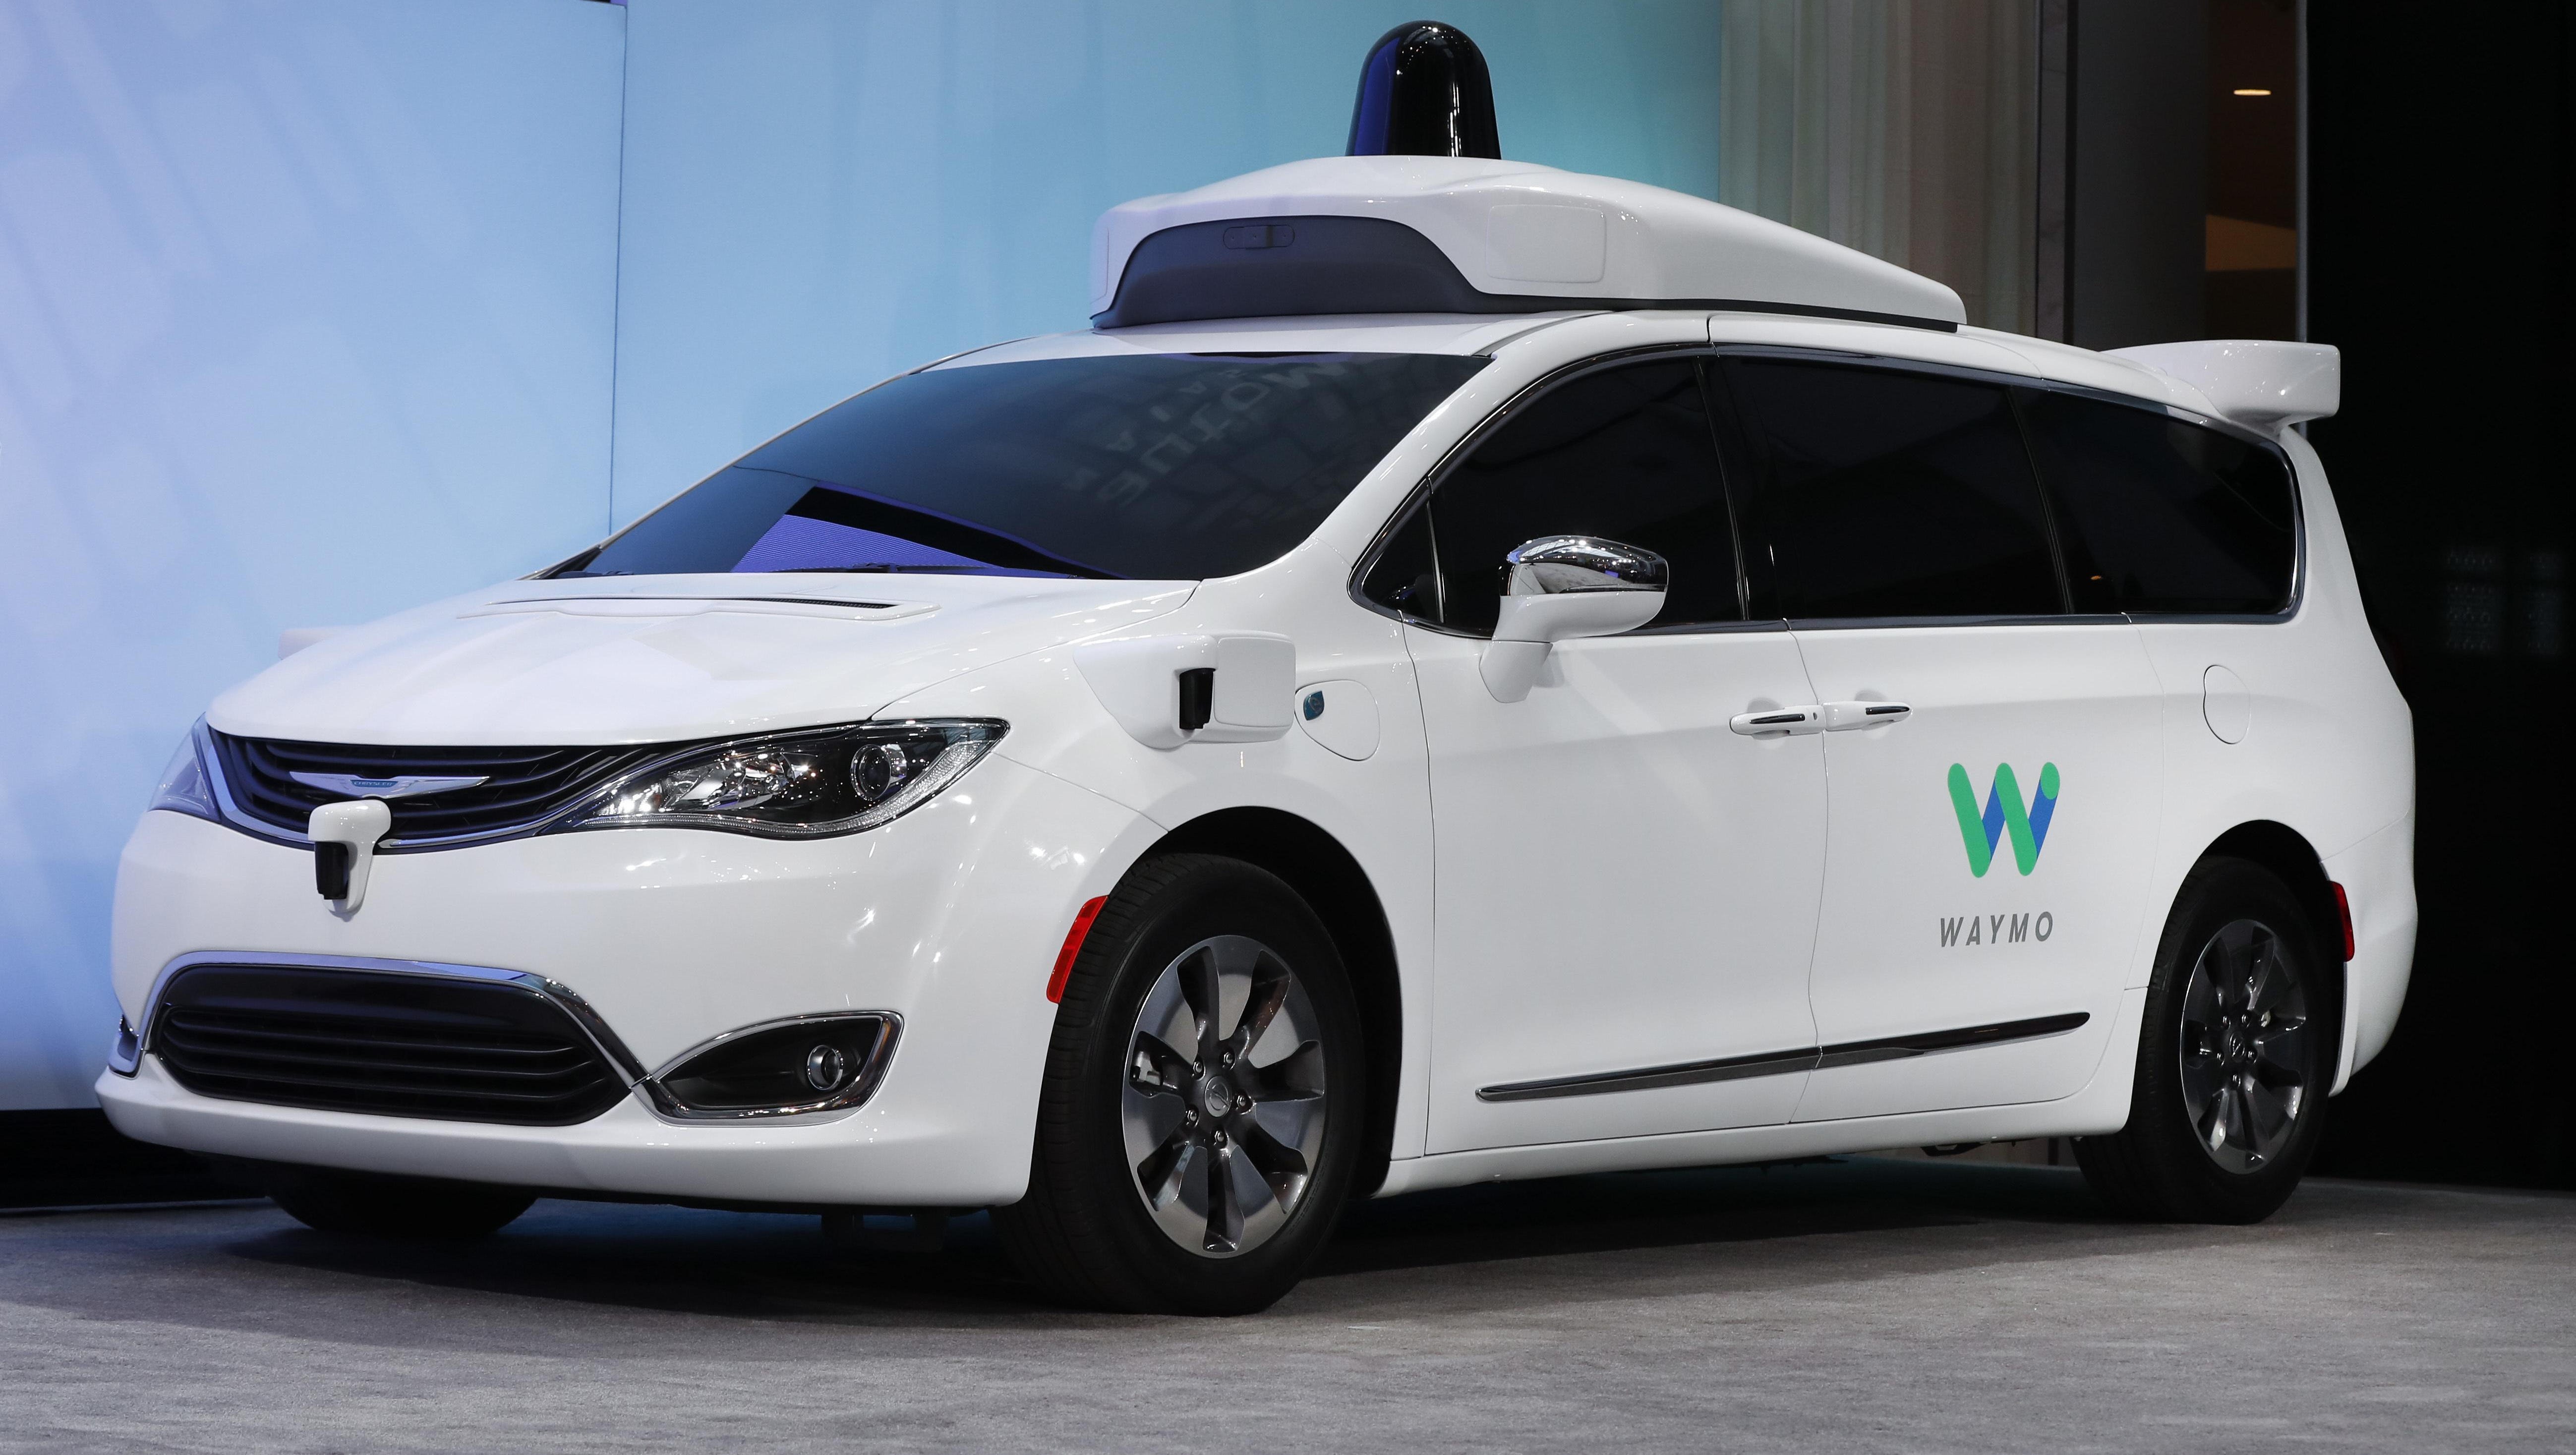 A Chrysler Pacifica is outfitted with Waymo LLC's self-driving system. The Google spinoff says it will invest up to $13.6 million in a new facility in Metro Detroit to integrate its technology into automaker partners' vehicles.